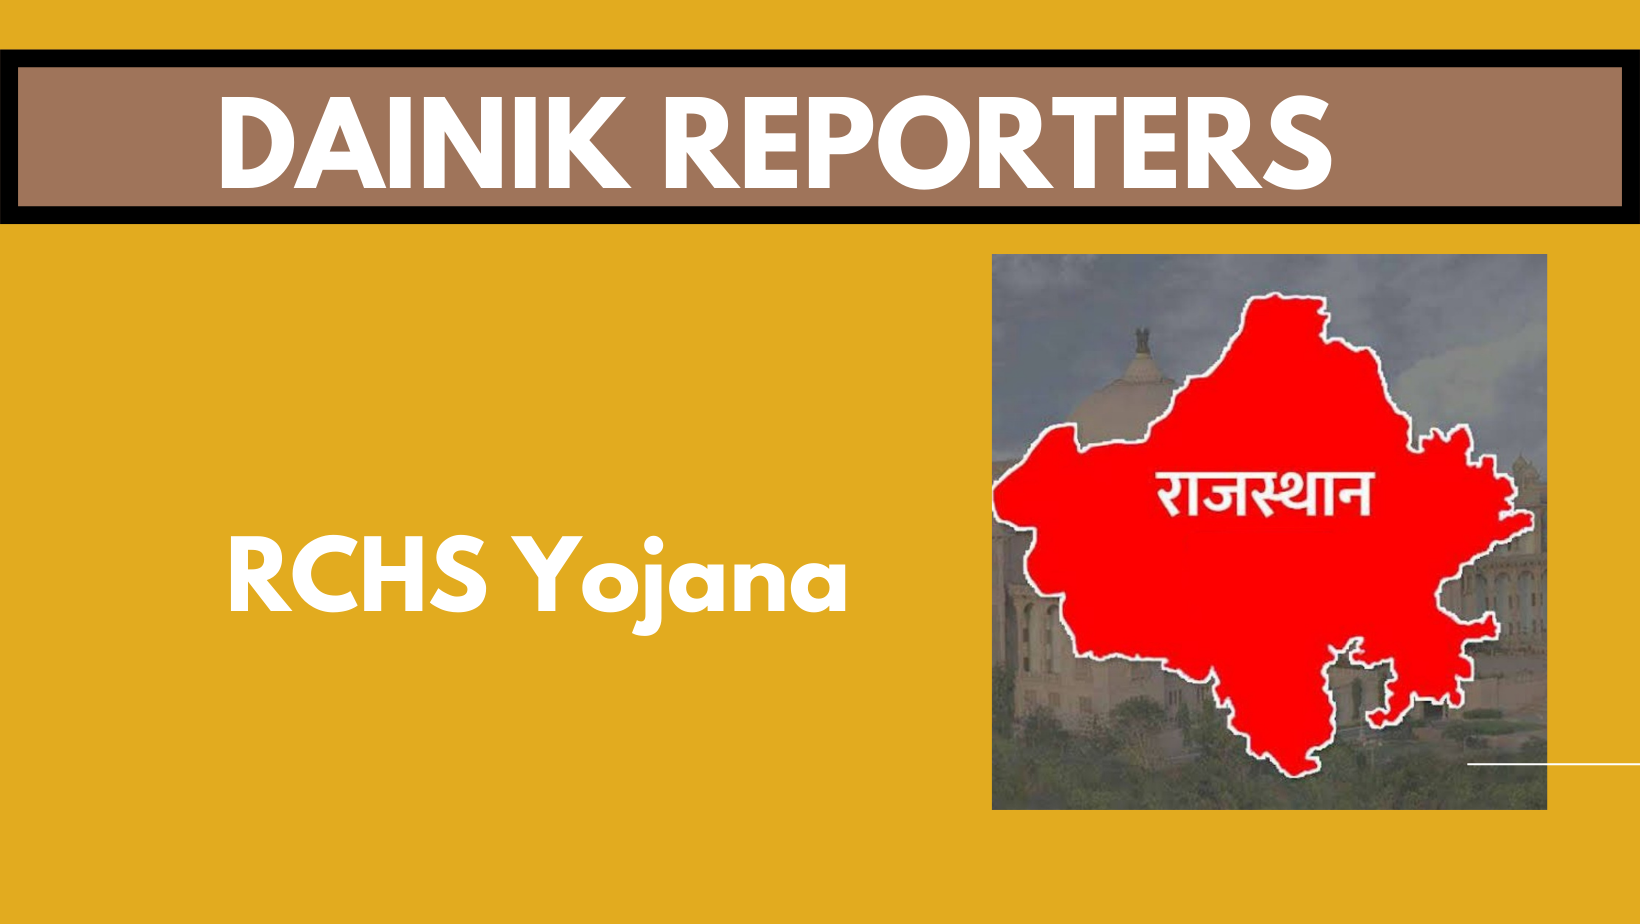 All types of medicines are available under RCHS Yojana in the district – General Manager